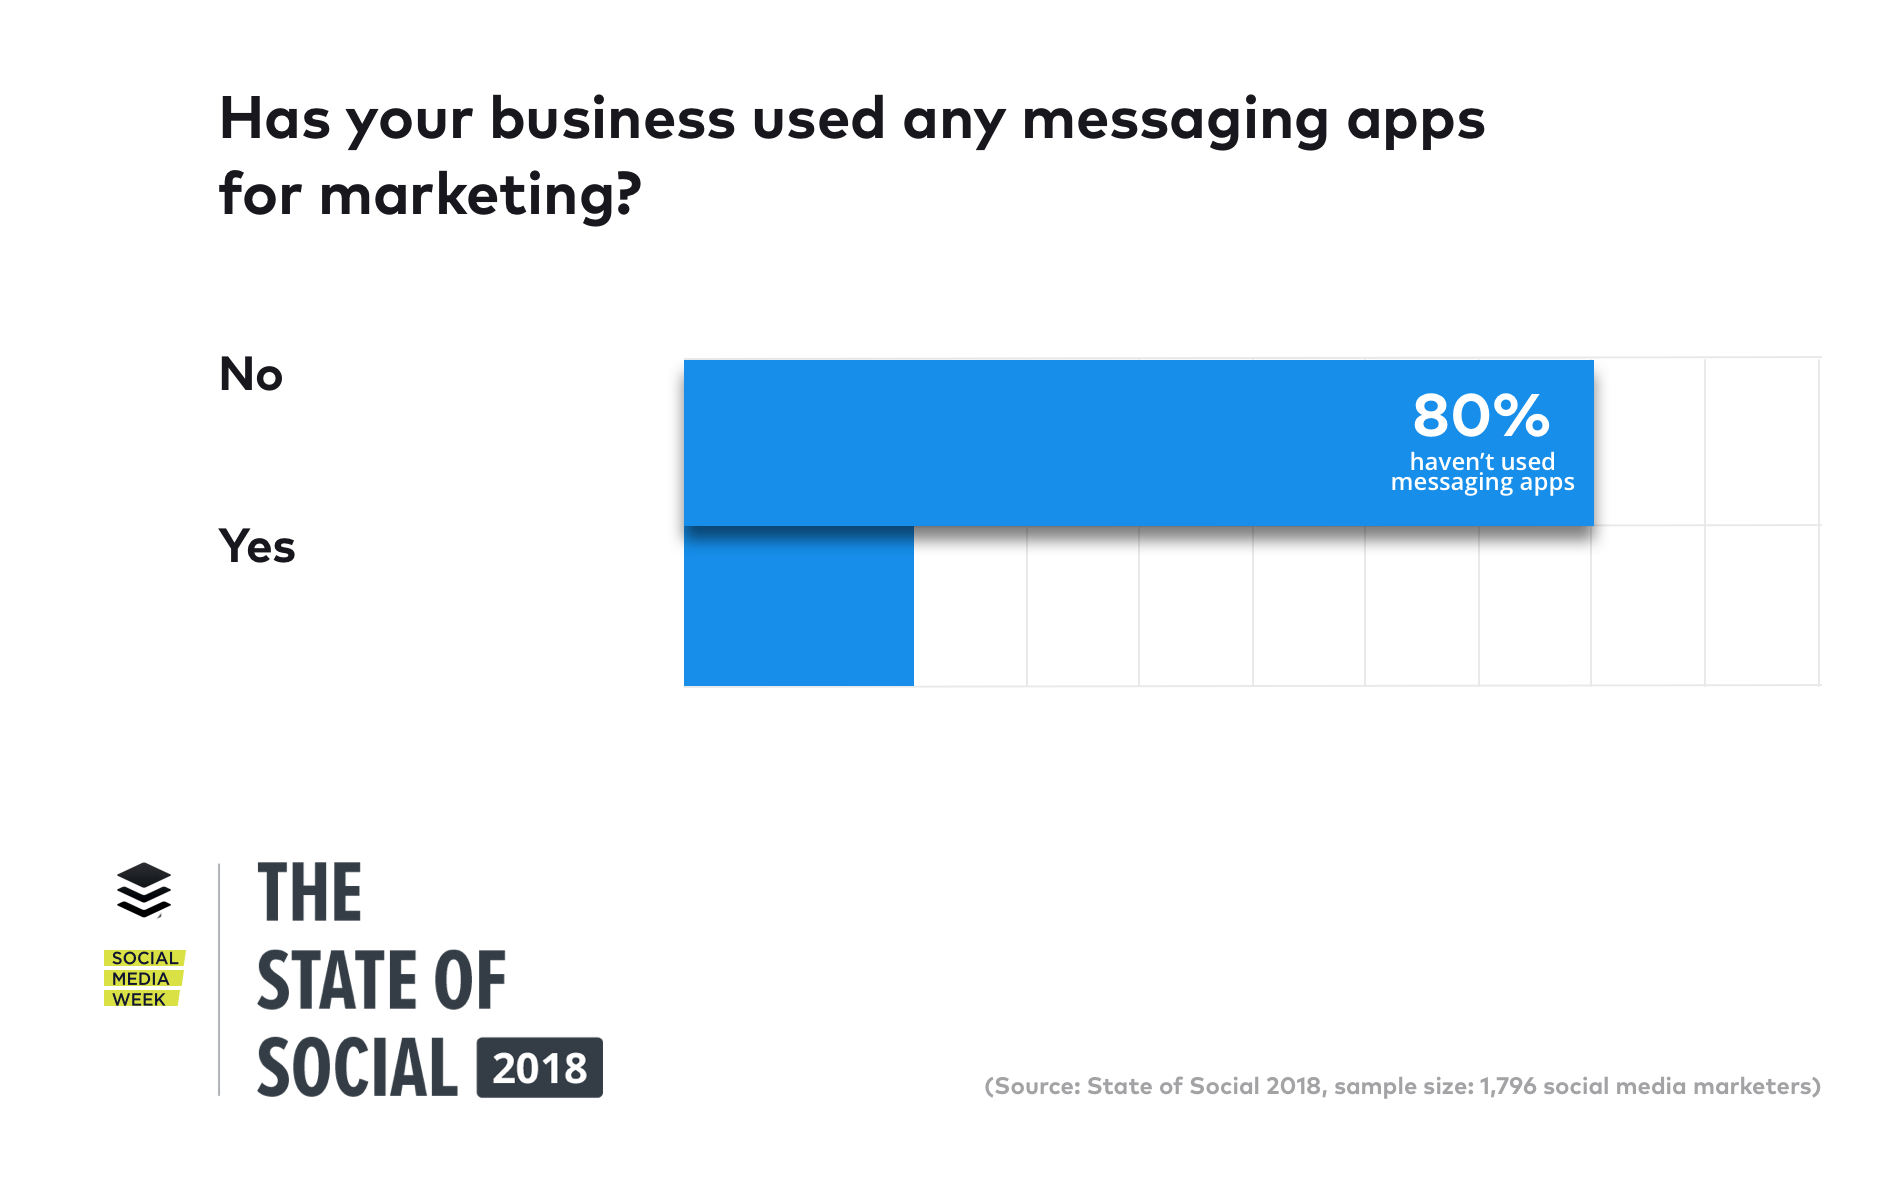 has your business used messaging apps for marketing